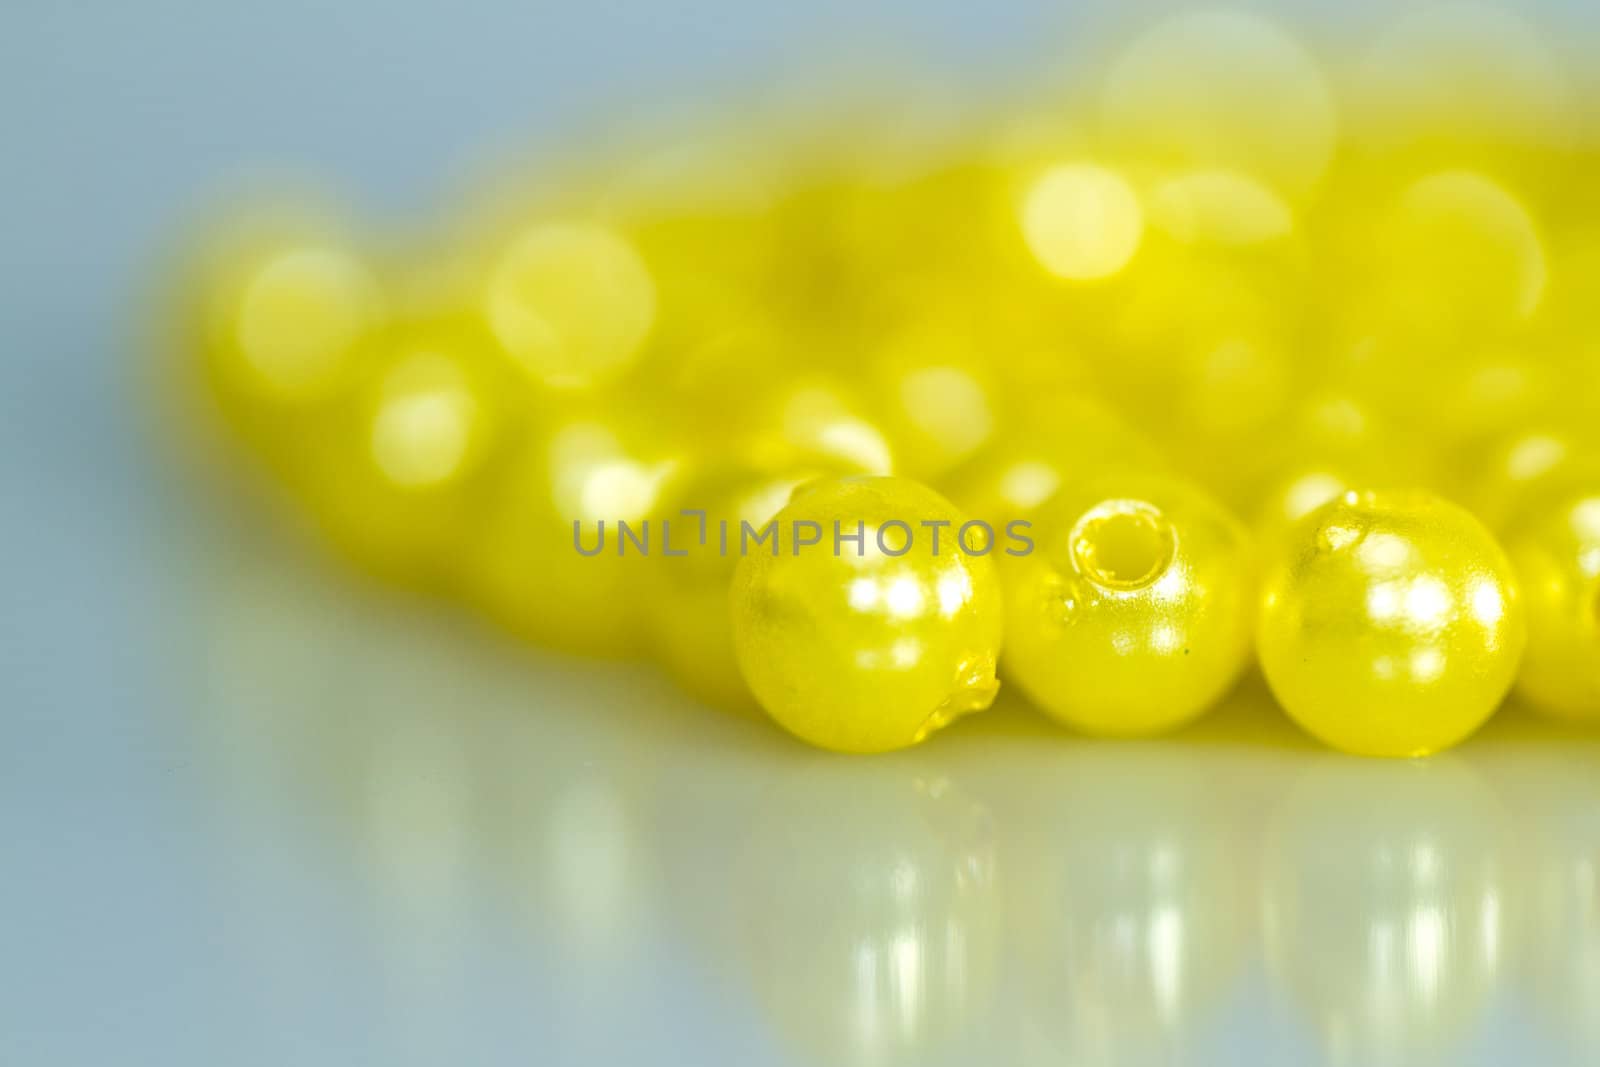 Yellow beads on bluish surface with mirror image